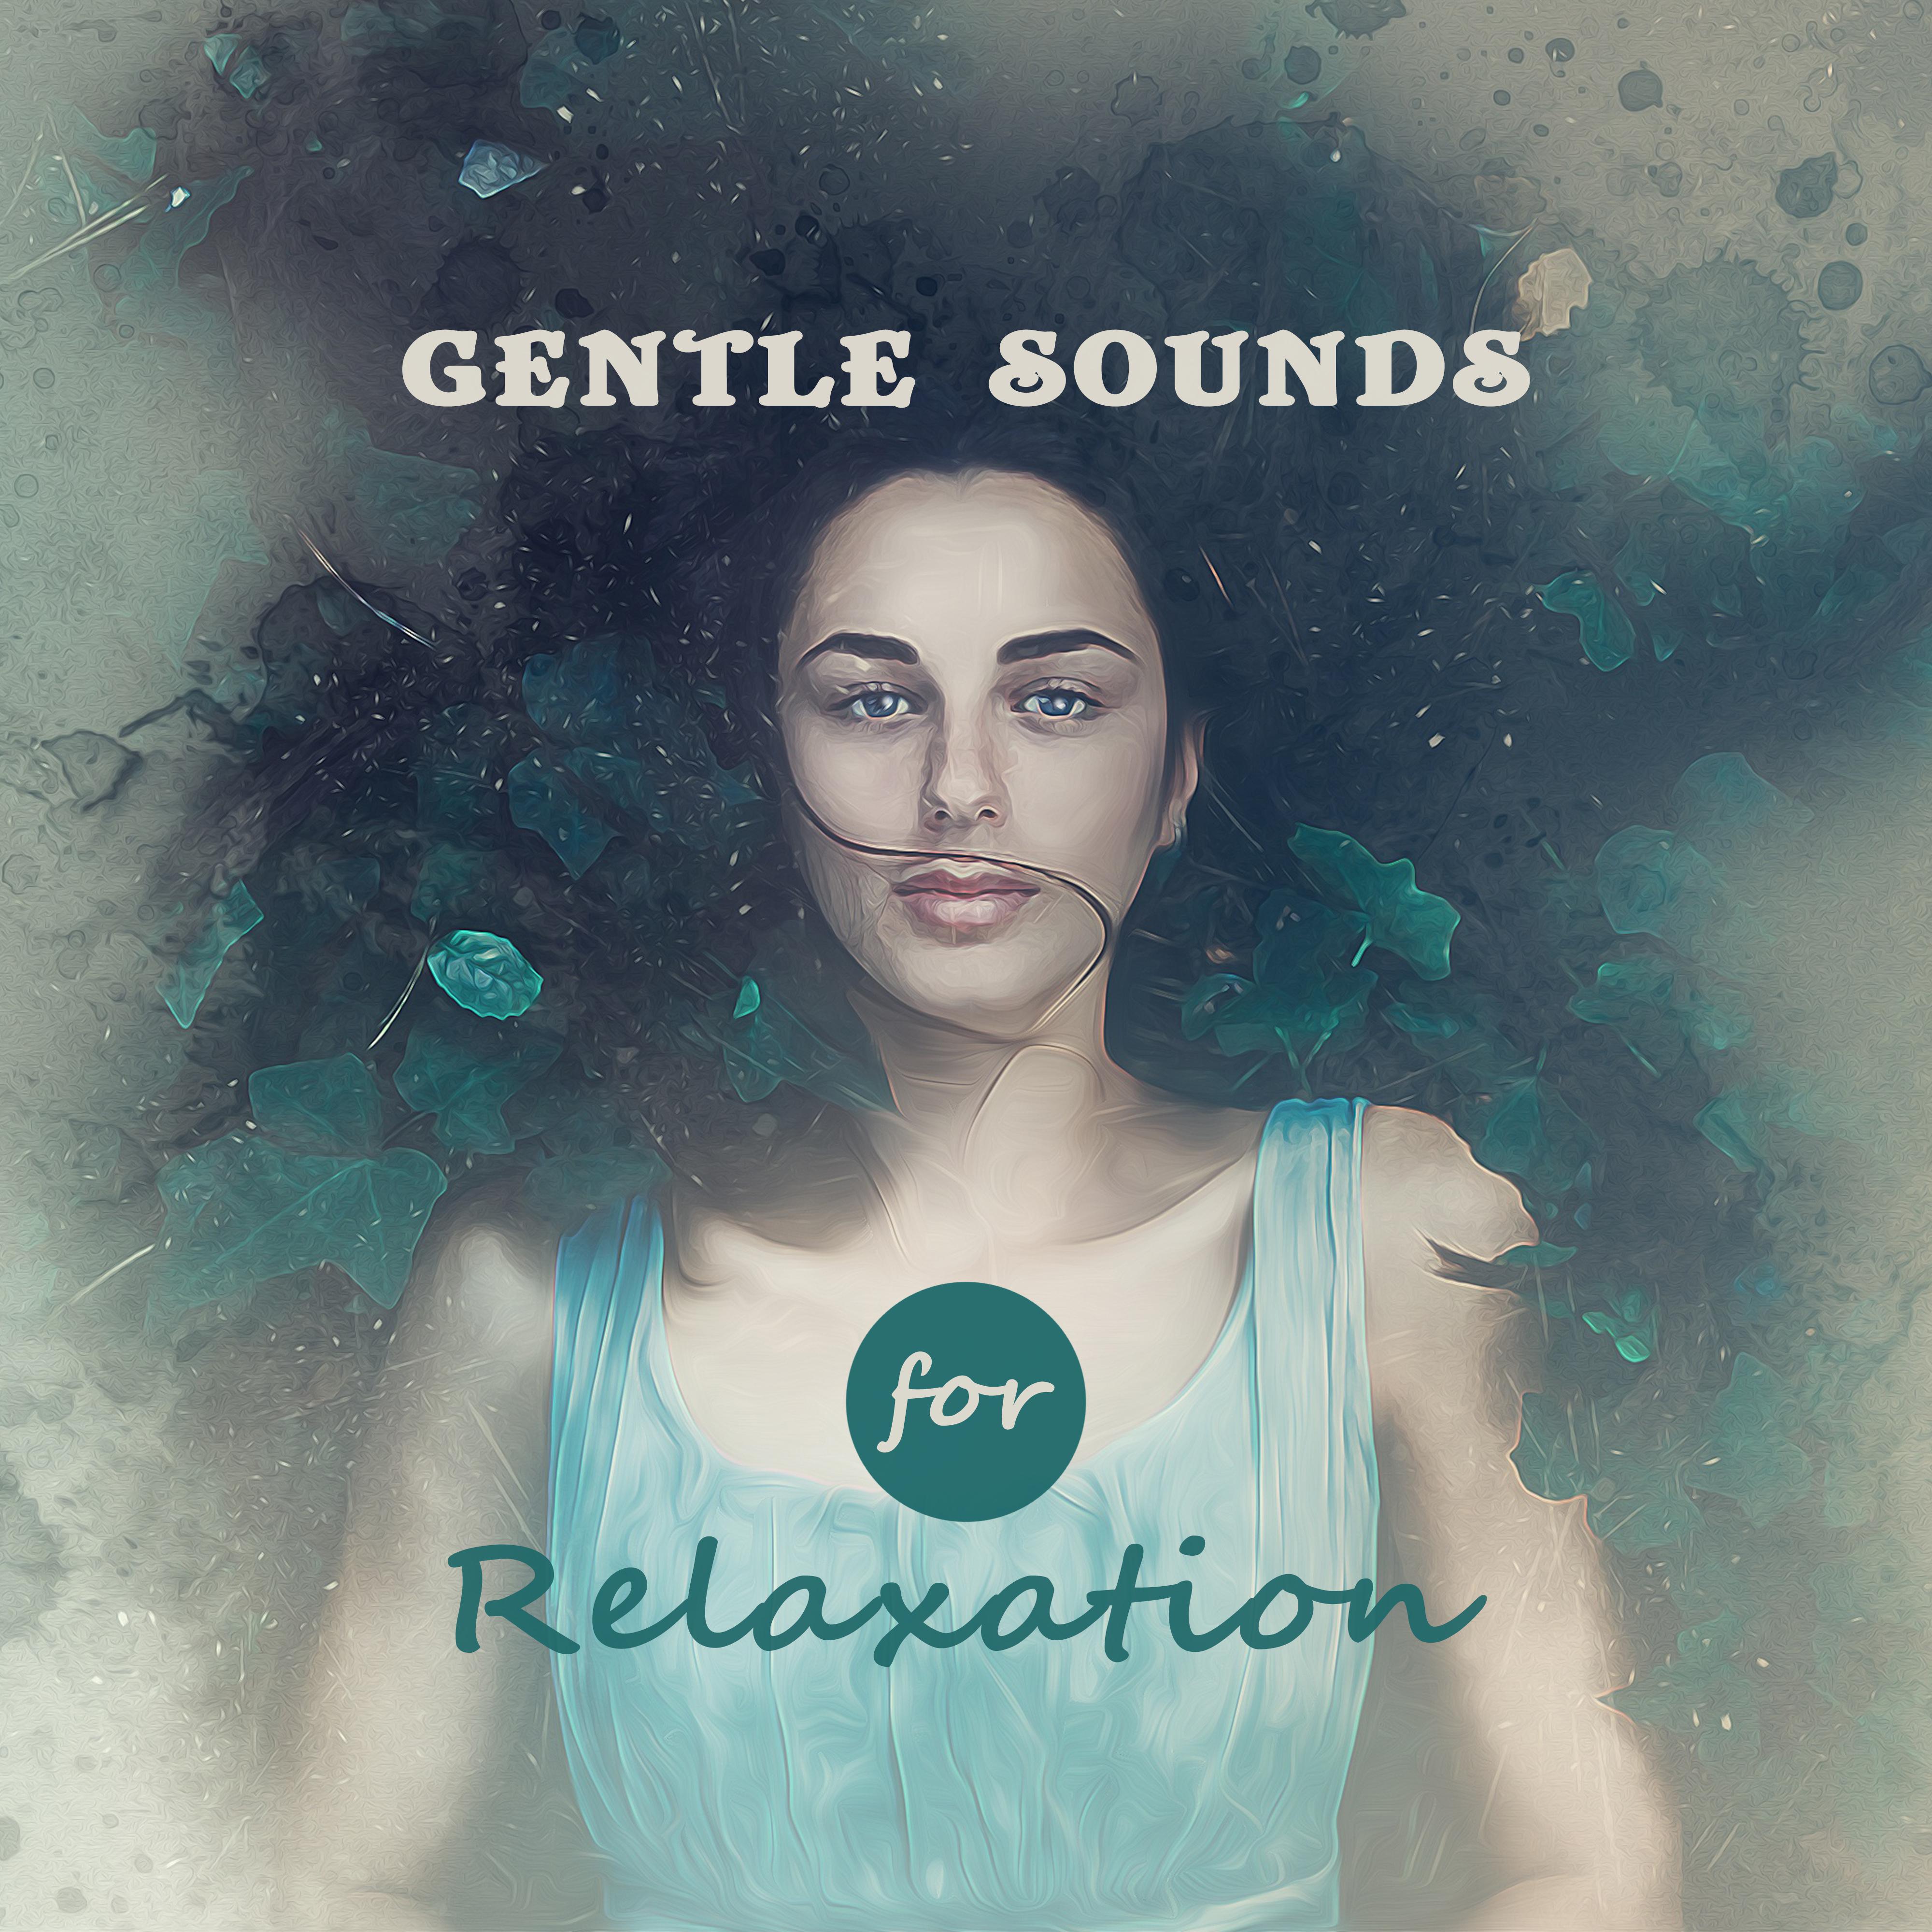 Gentle Sounds for Relaxation – Zen, Deep Relief for Mind, Soothing Music to Calm Down, Inner Tranquility, Rest